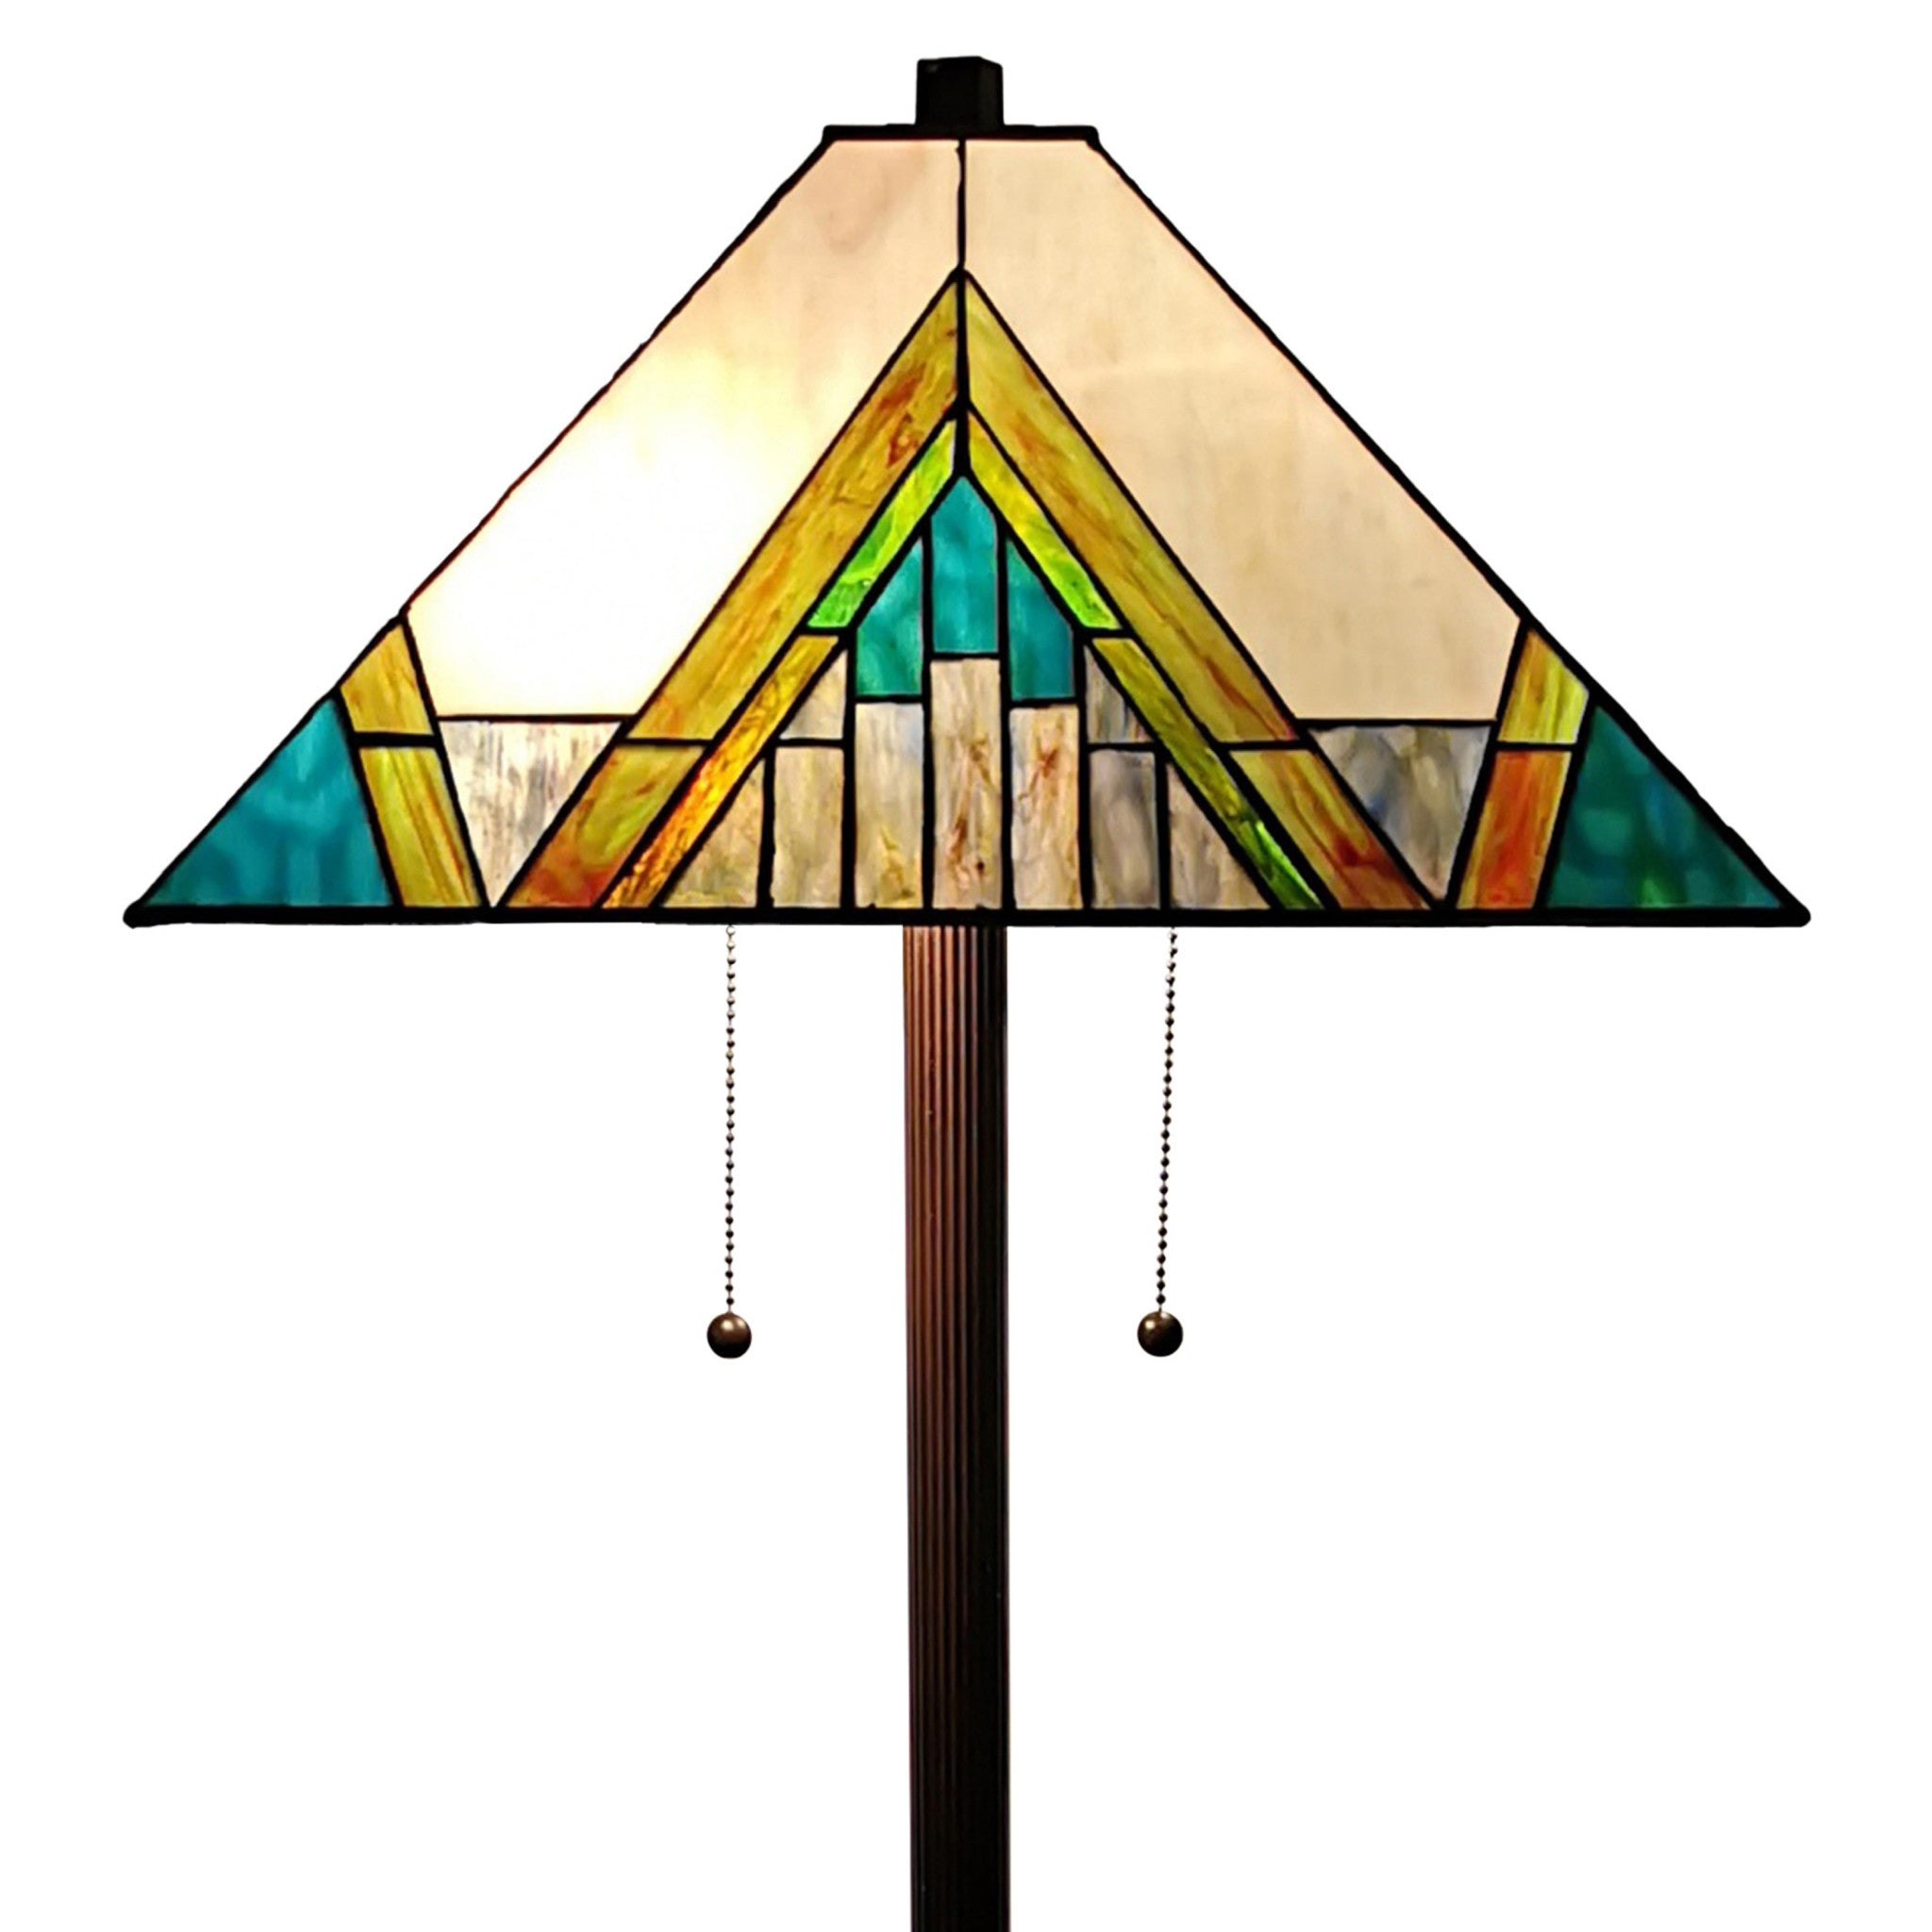 62" Brown Two Light Traditional Shaped Floor Lamp With Beige Green And Blue Geometric Stained Glass Empire Shade